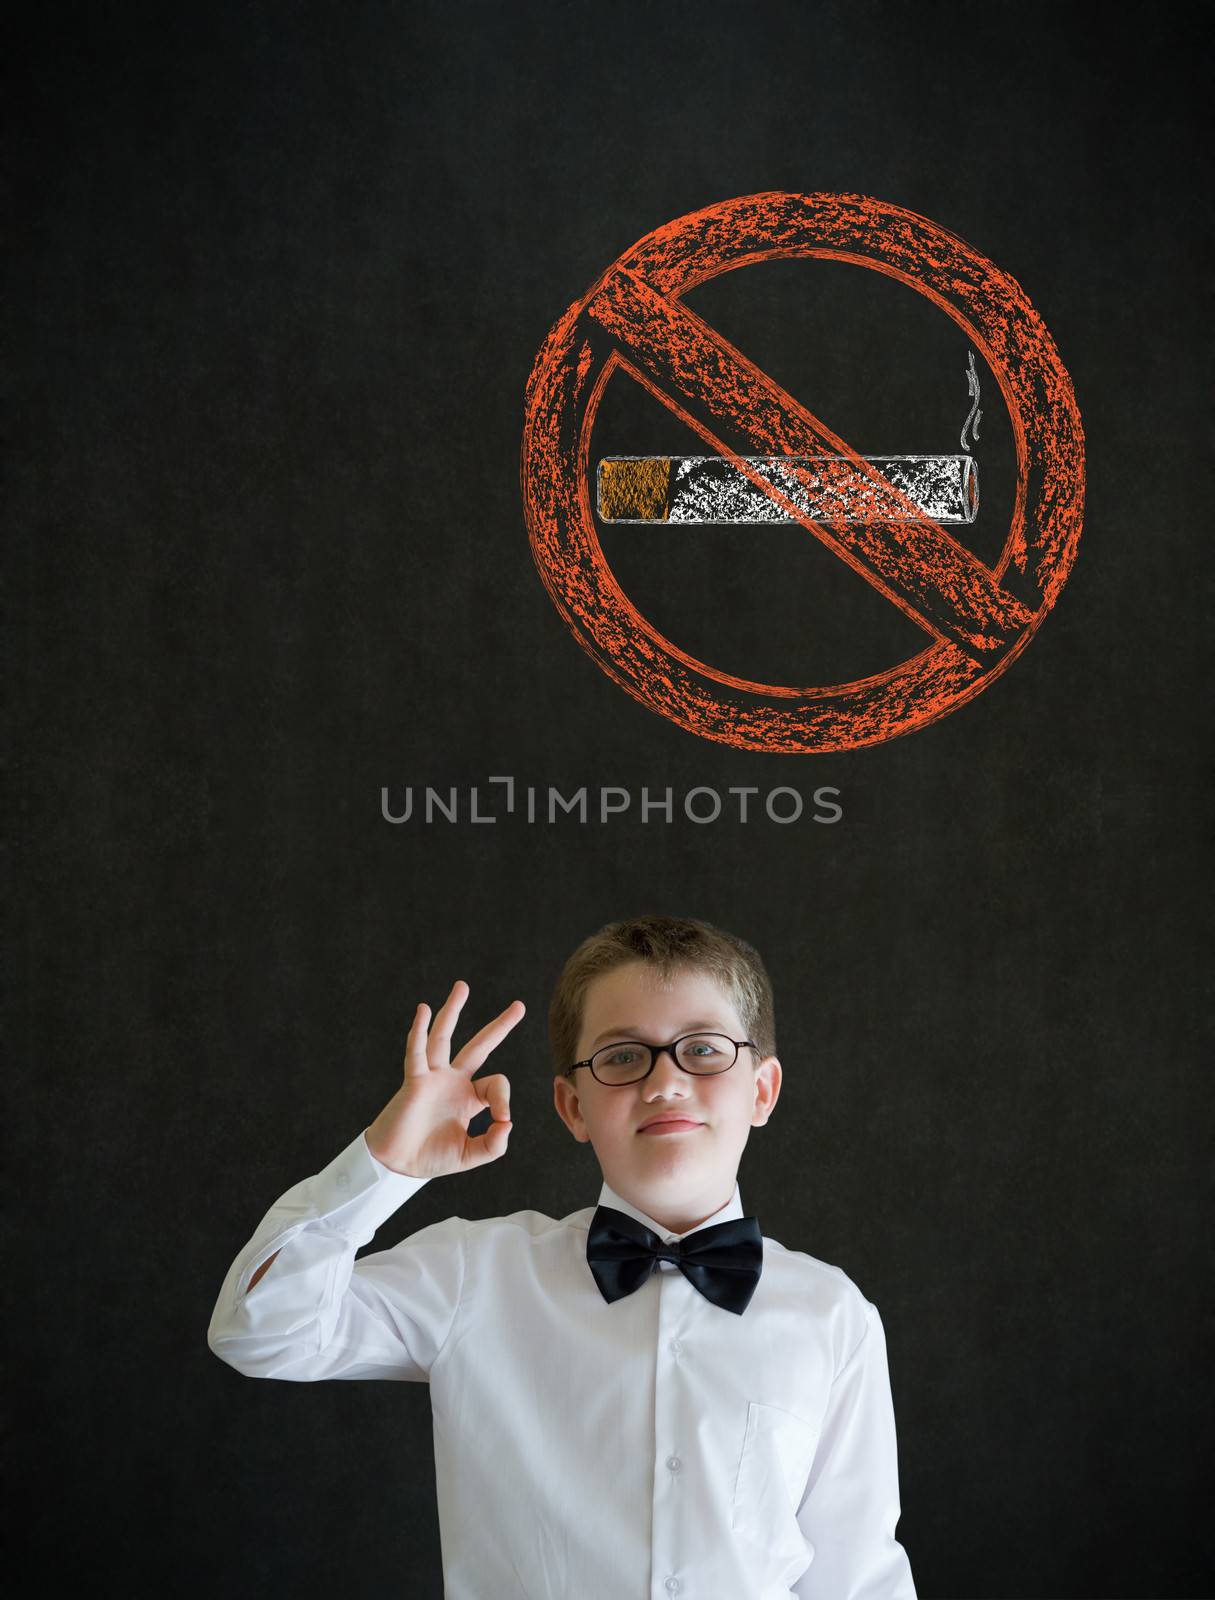 All ok or okay sign boy dressed up as business man with no smoking chalk sign on blackboard background